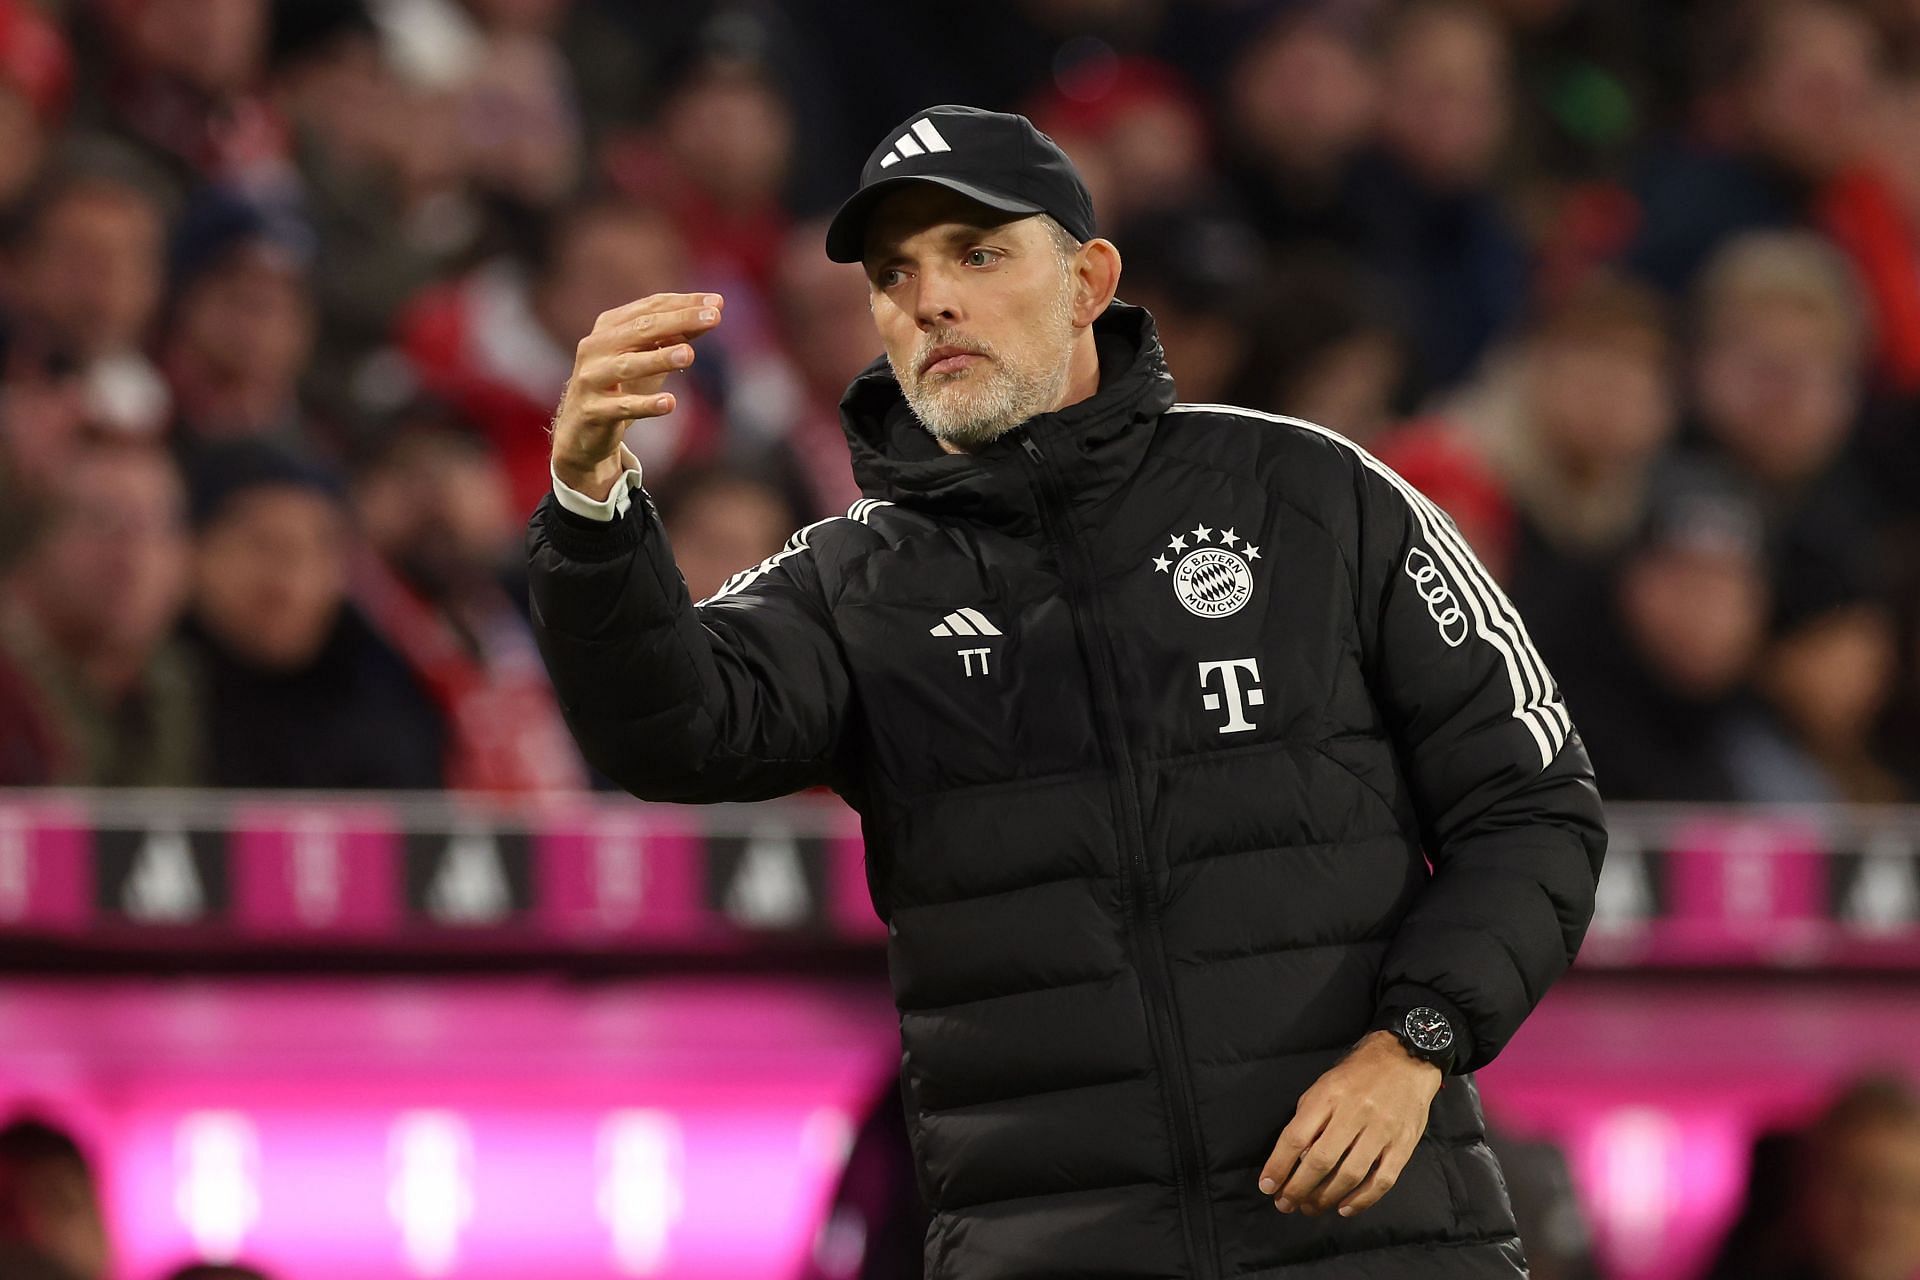 Thomas Tuchel could be an option to replace Erik ten Hag at Old Trafford